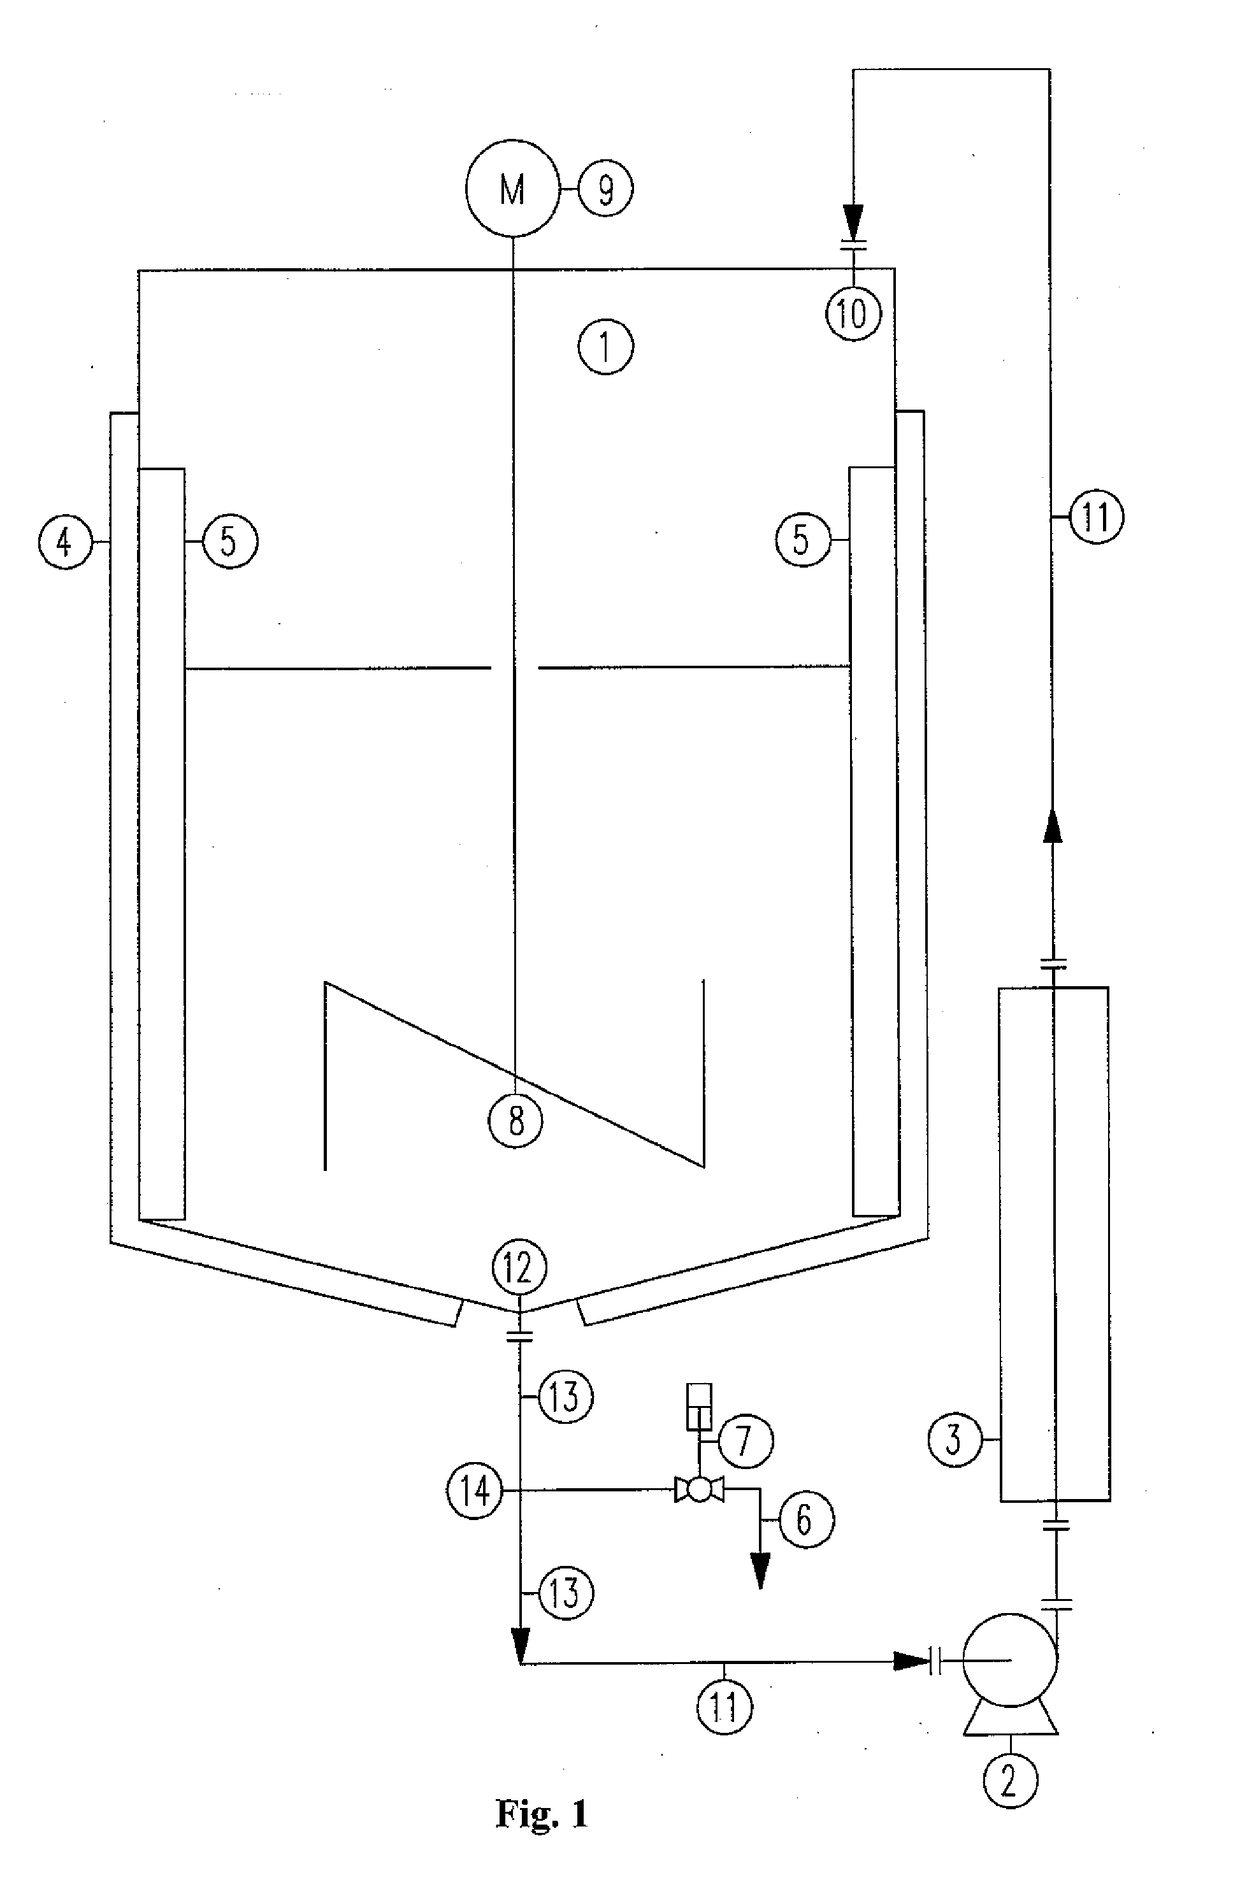 Discontinuous crystallization unit for the production of ball-shaped crystals